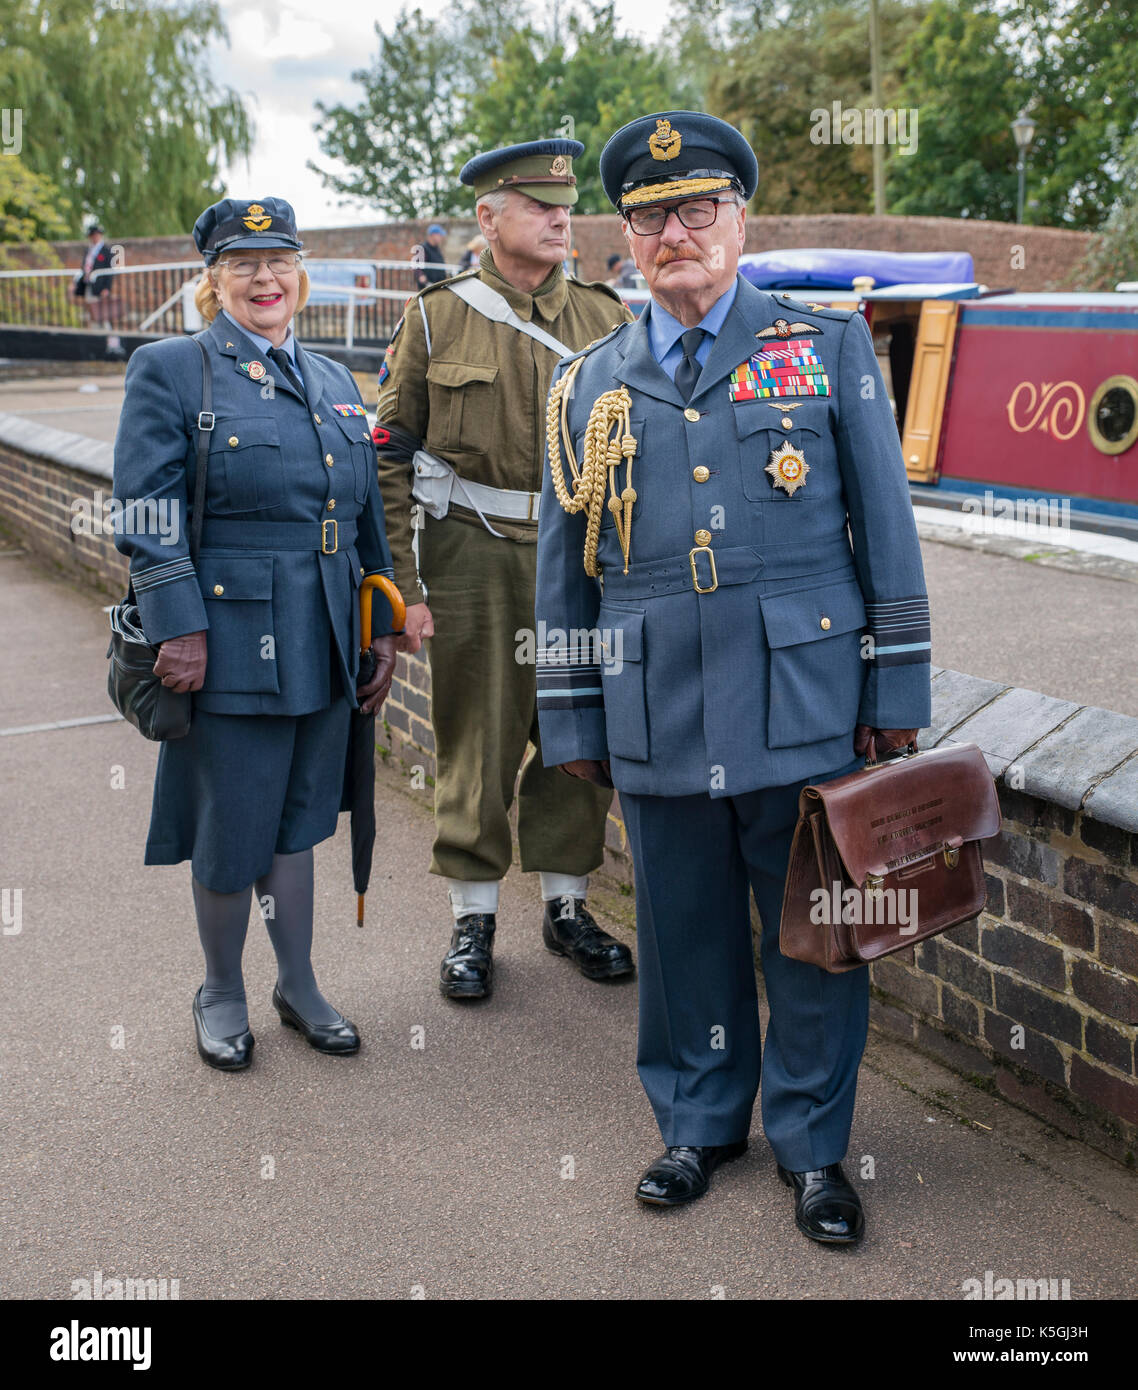 Stoke Bruerne's village at war weekend,re-enactors from all over the UK enjoy a weekend of vintage fun. Credit: Scott Carruthers/Alamy Live News Stock Photo